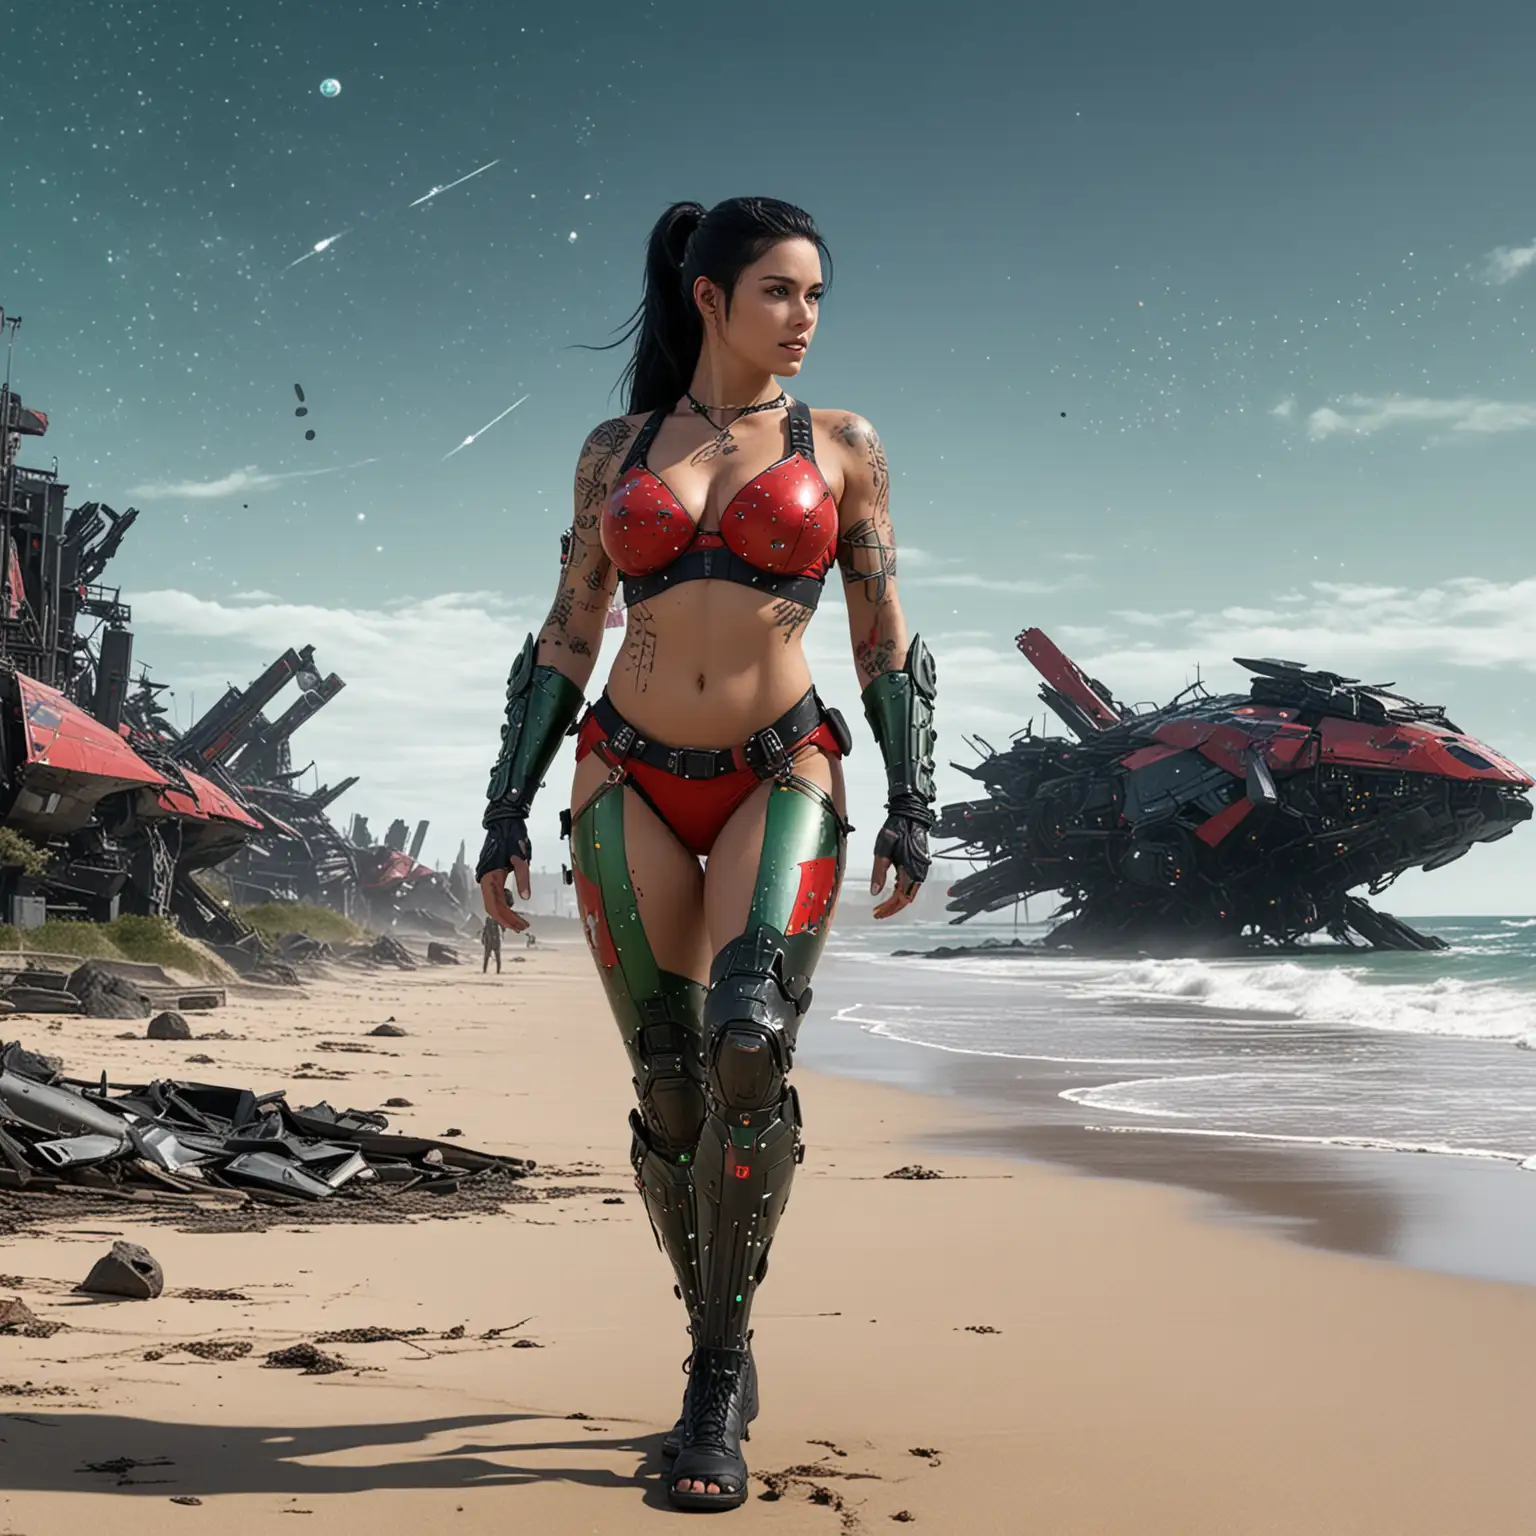 athletic adult female with large breasts, black hair in ponytail, black red and green clothing, wearing high tech futuristic armor bikini, tattoos of constellations, walking on a beach, looking towards the sky, military installation in background, high tech futuristic wreckage scattered on ground.